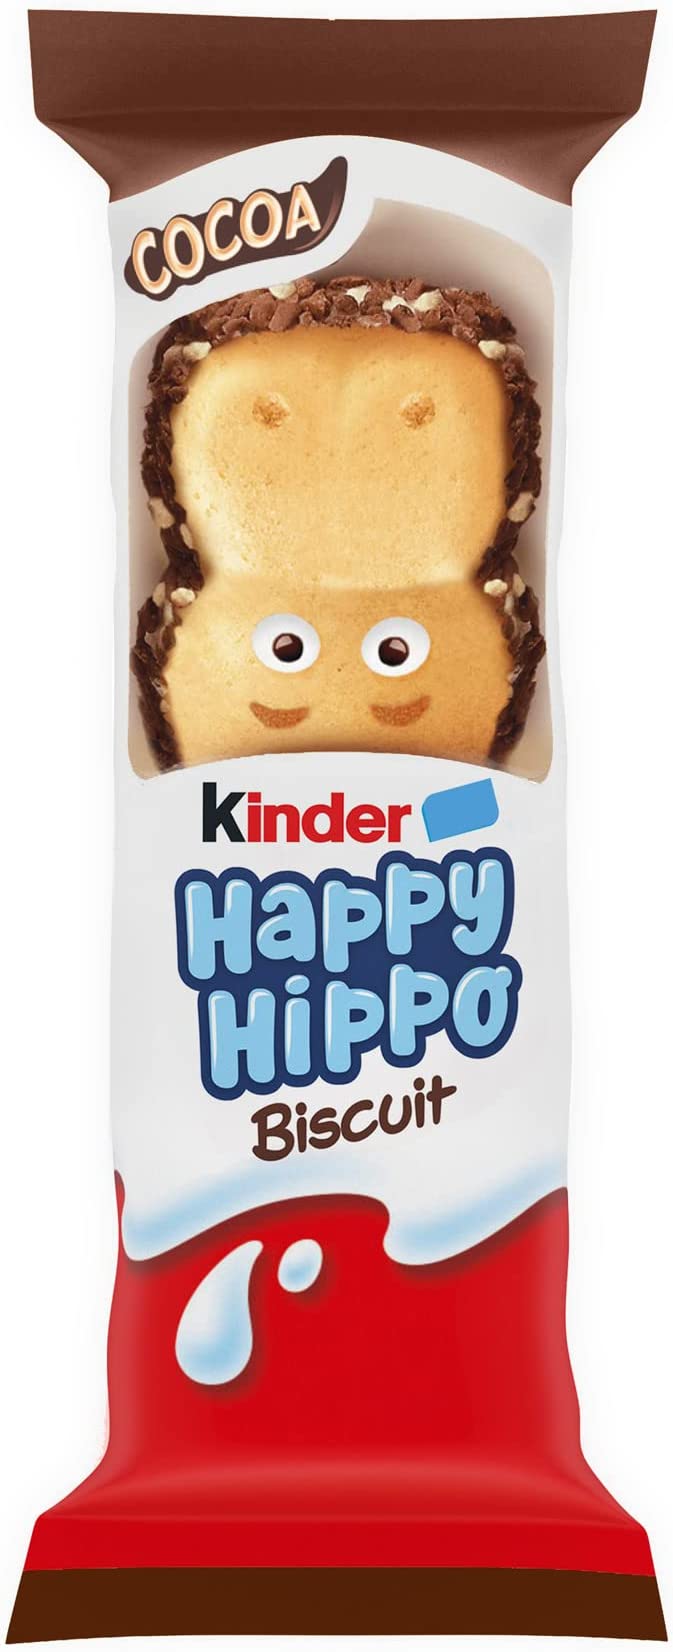 Kinder Happy Hippo Chocolate Biscuit Cocoa - Pack of 28 x 20.5 gm